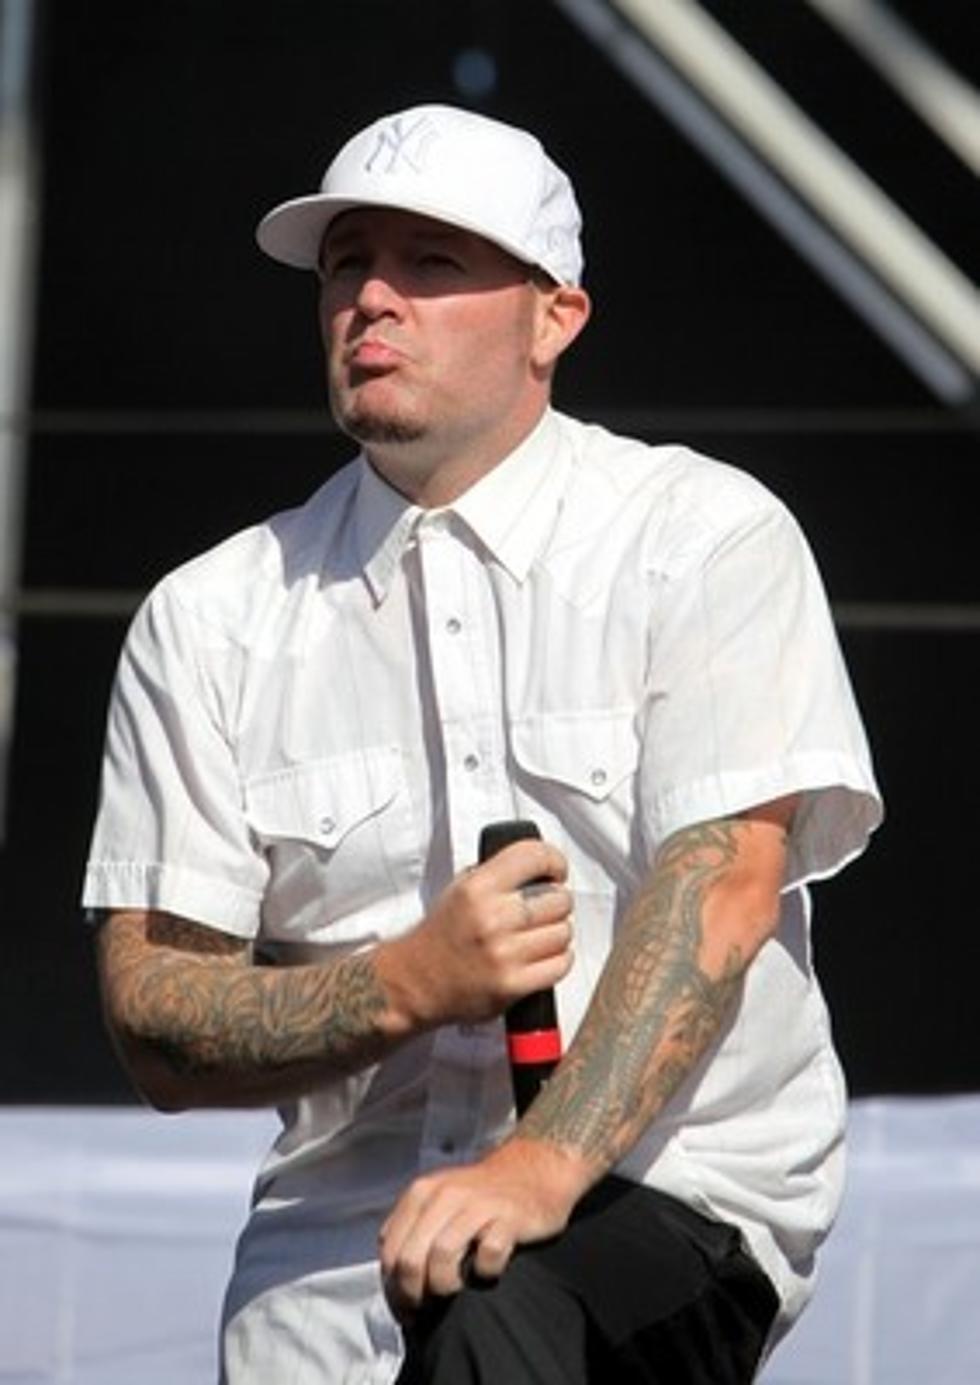 Fred Durst to star in ‘Douchebag’?